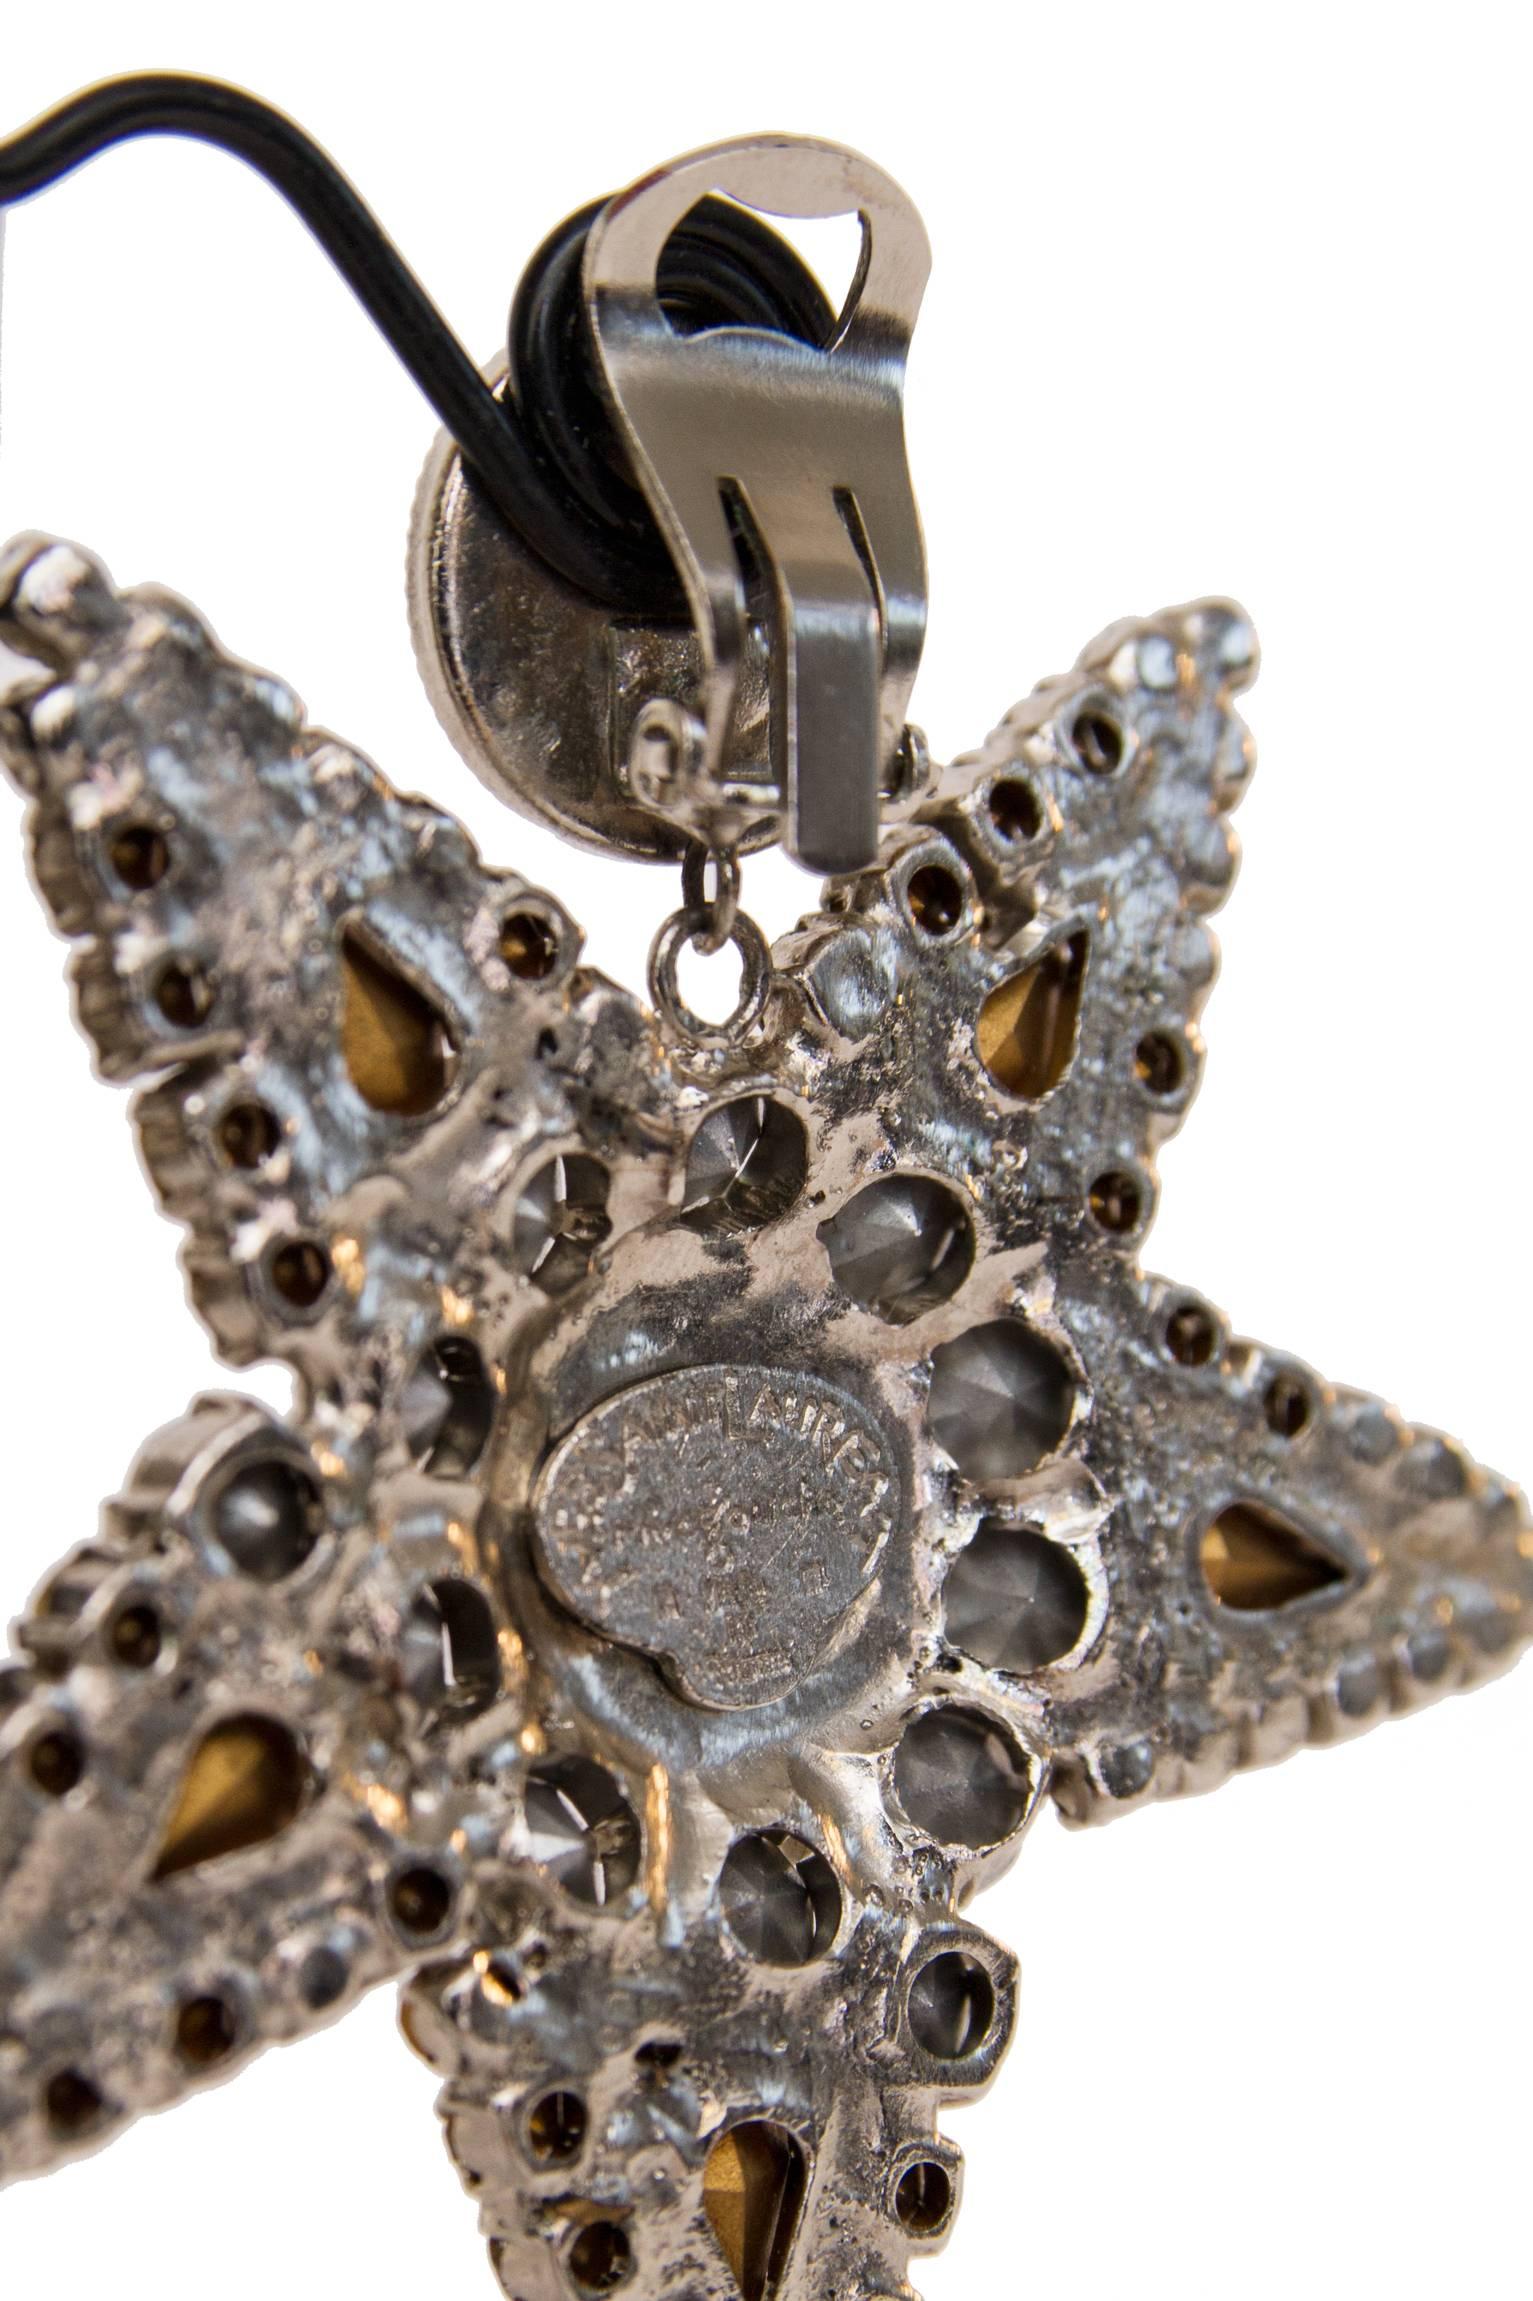 A pair of 1980s sparkling rhinestone studded Yves Saint Laurent Rive Gauche clip-on earrings consisting of a large rhinestone center with a large star-shaped pendant. 

The earrings are stamped: Yves Saint Laurent, Rive Gauche, Made in France

The